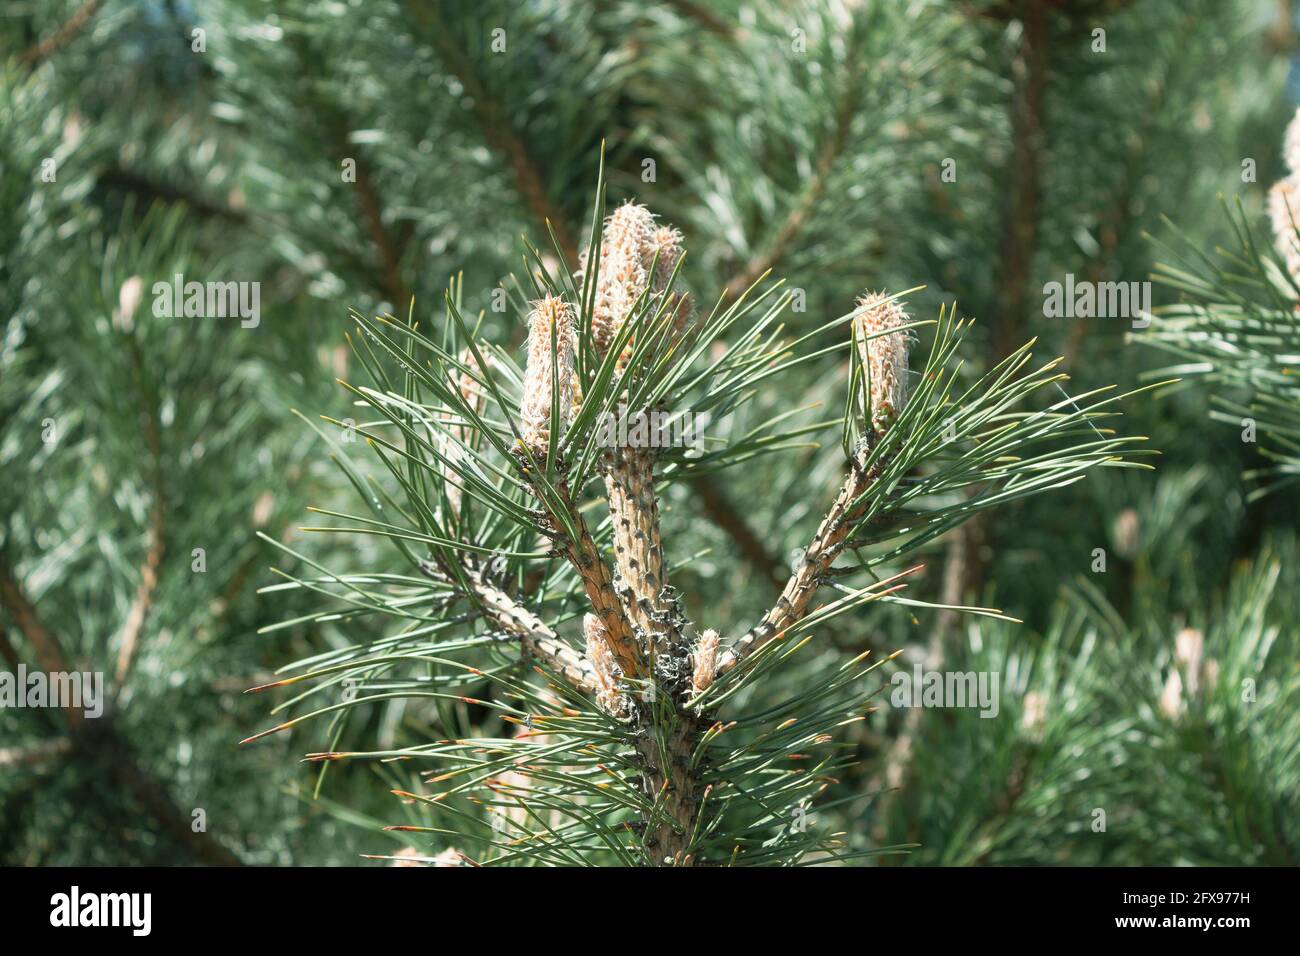 Young inflorescence on a pine branch in the spring. Inflorescence of a fluffy sprout and cones on pine branches. Flowering mediterranean pine Stock Photo